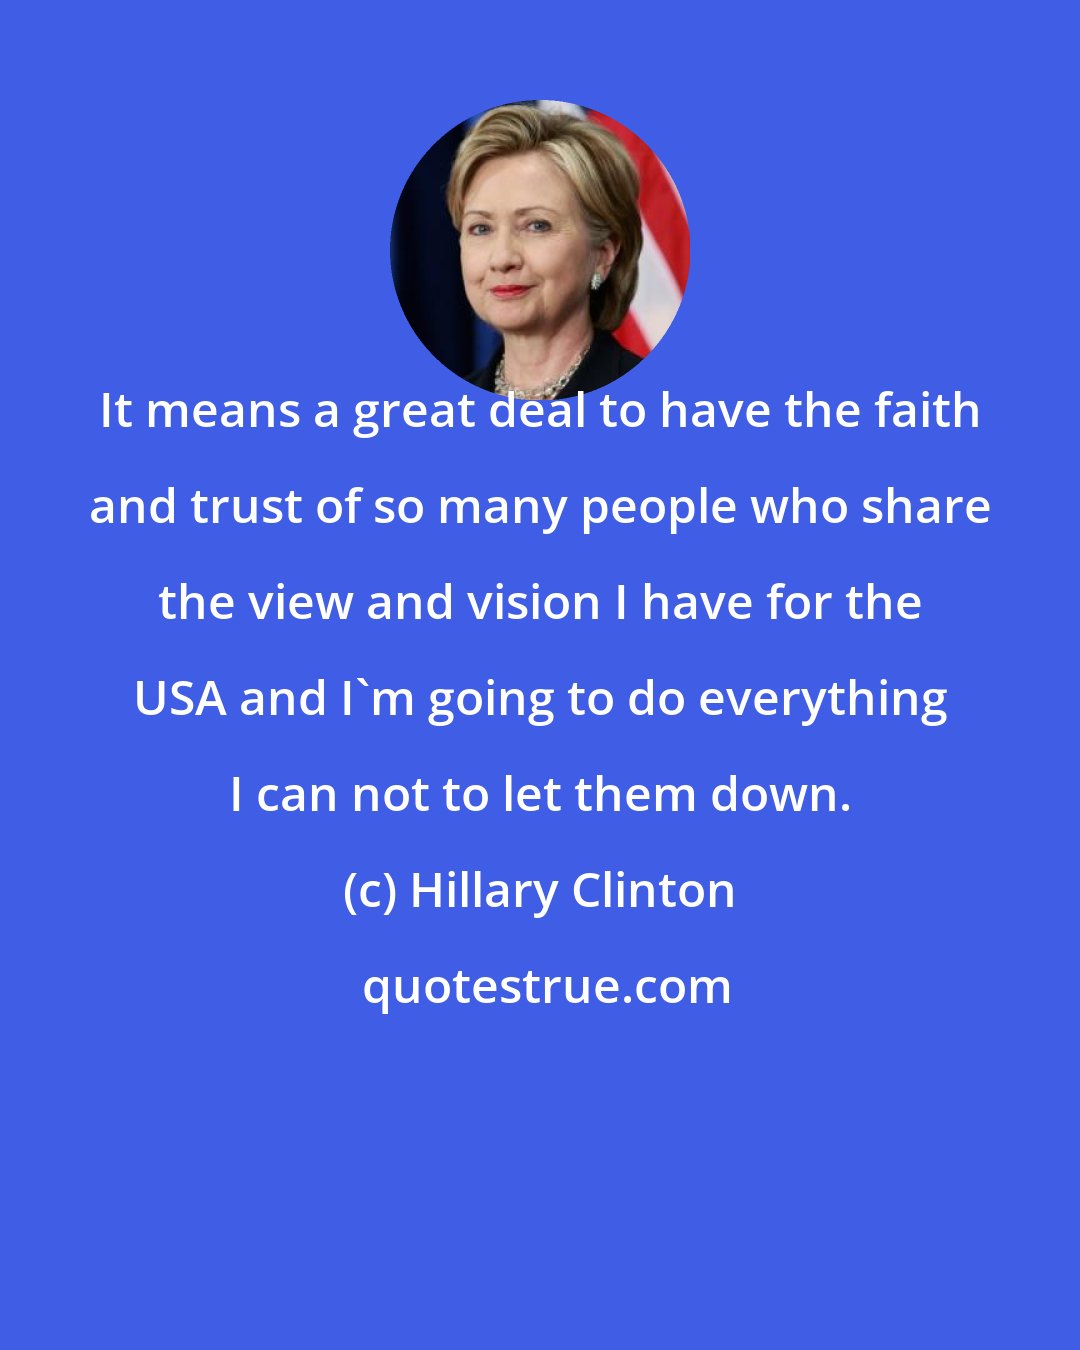 Hillary Clinton: It means a great deal to have the faith and trust of so many people who share the view and vision I have for the USA and I'm going to do everything I can not to let them down.